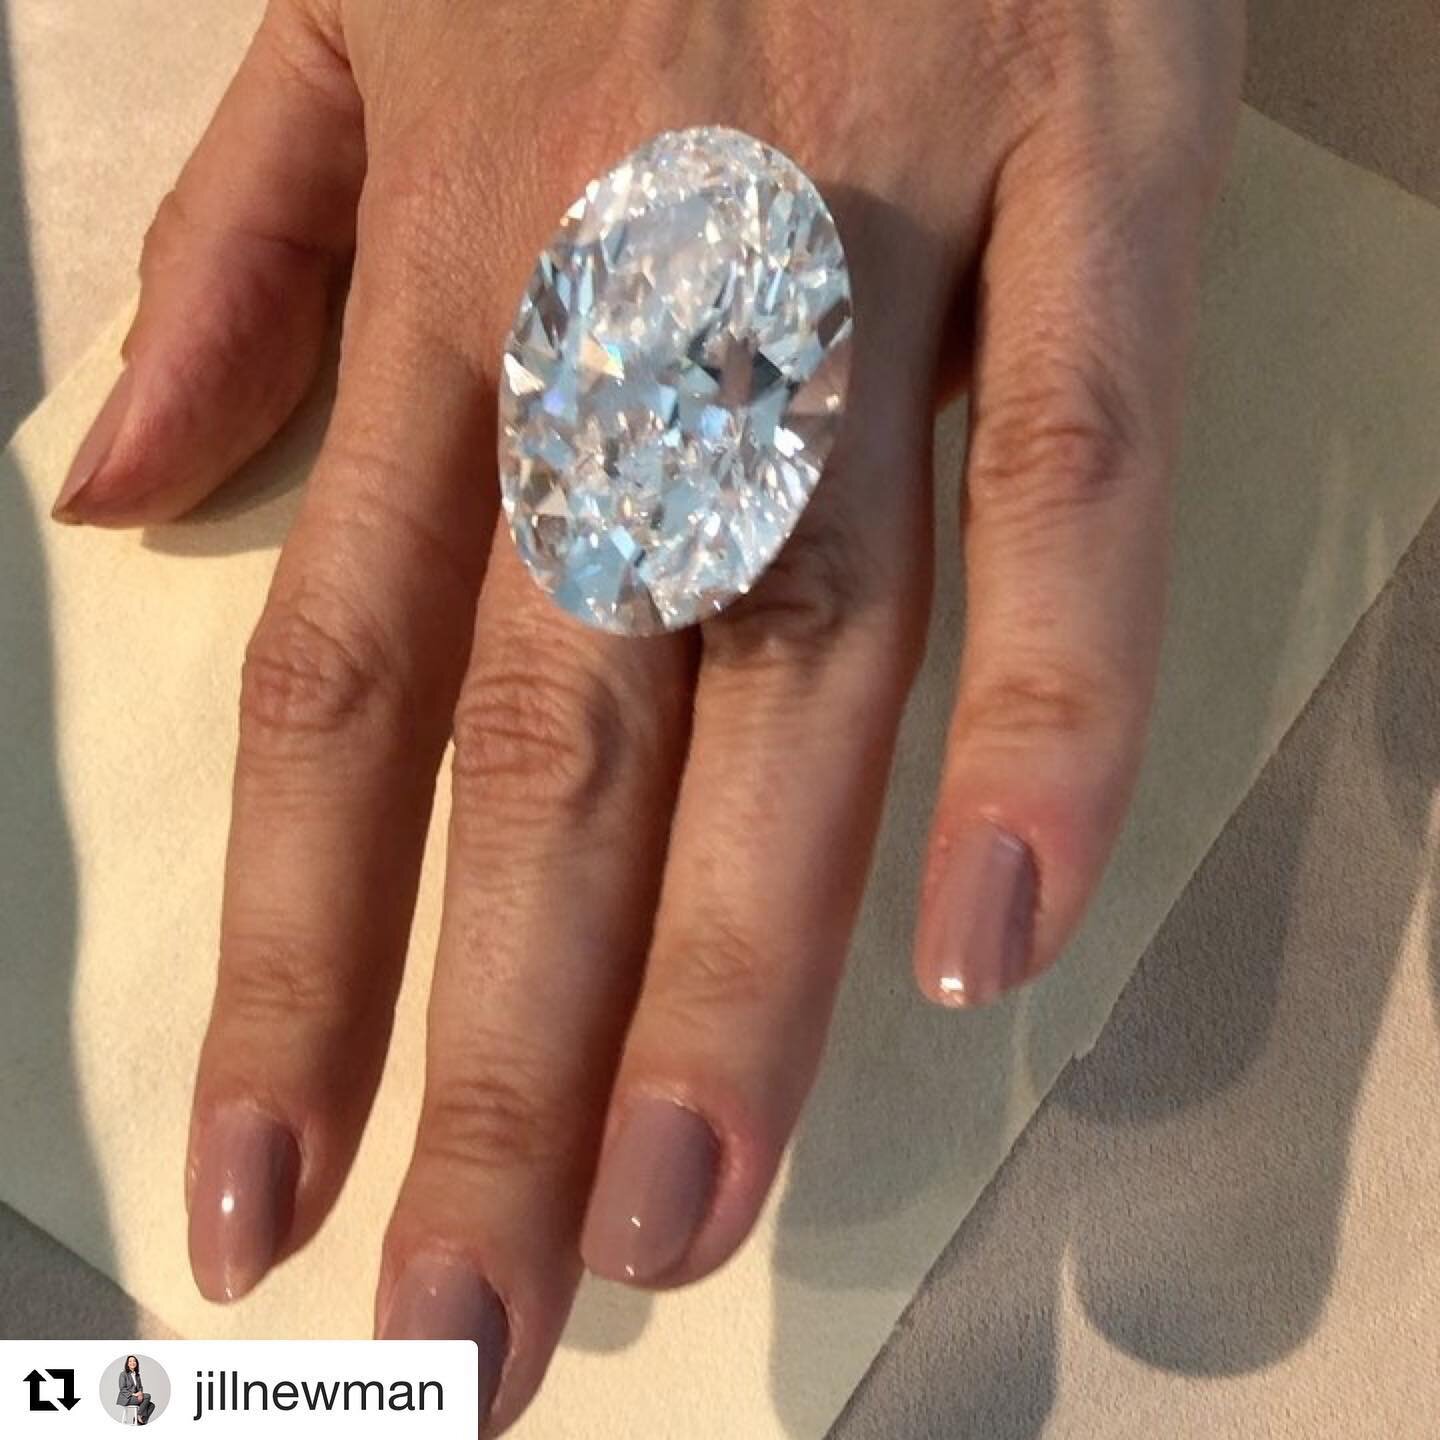 Will this 102.39 cts be sold at a bargain or will it make a record price? One thing is for sure, we all will be watching!  #Repost @jillnewman with @get_repost
・・・
Auction history will be made next month when @sothebysjewels offers this exceedingly r